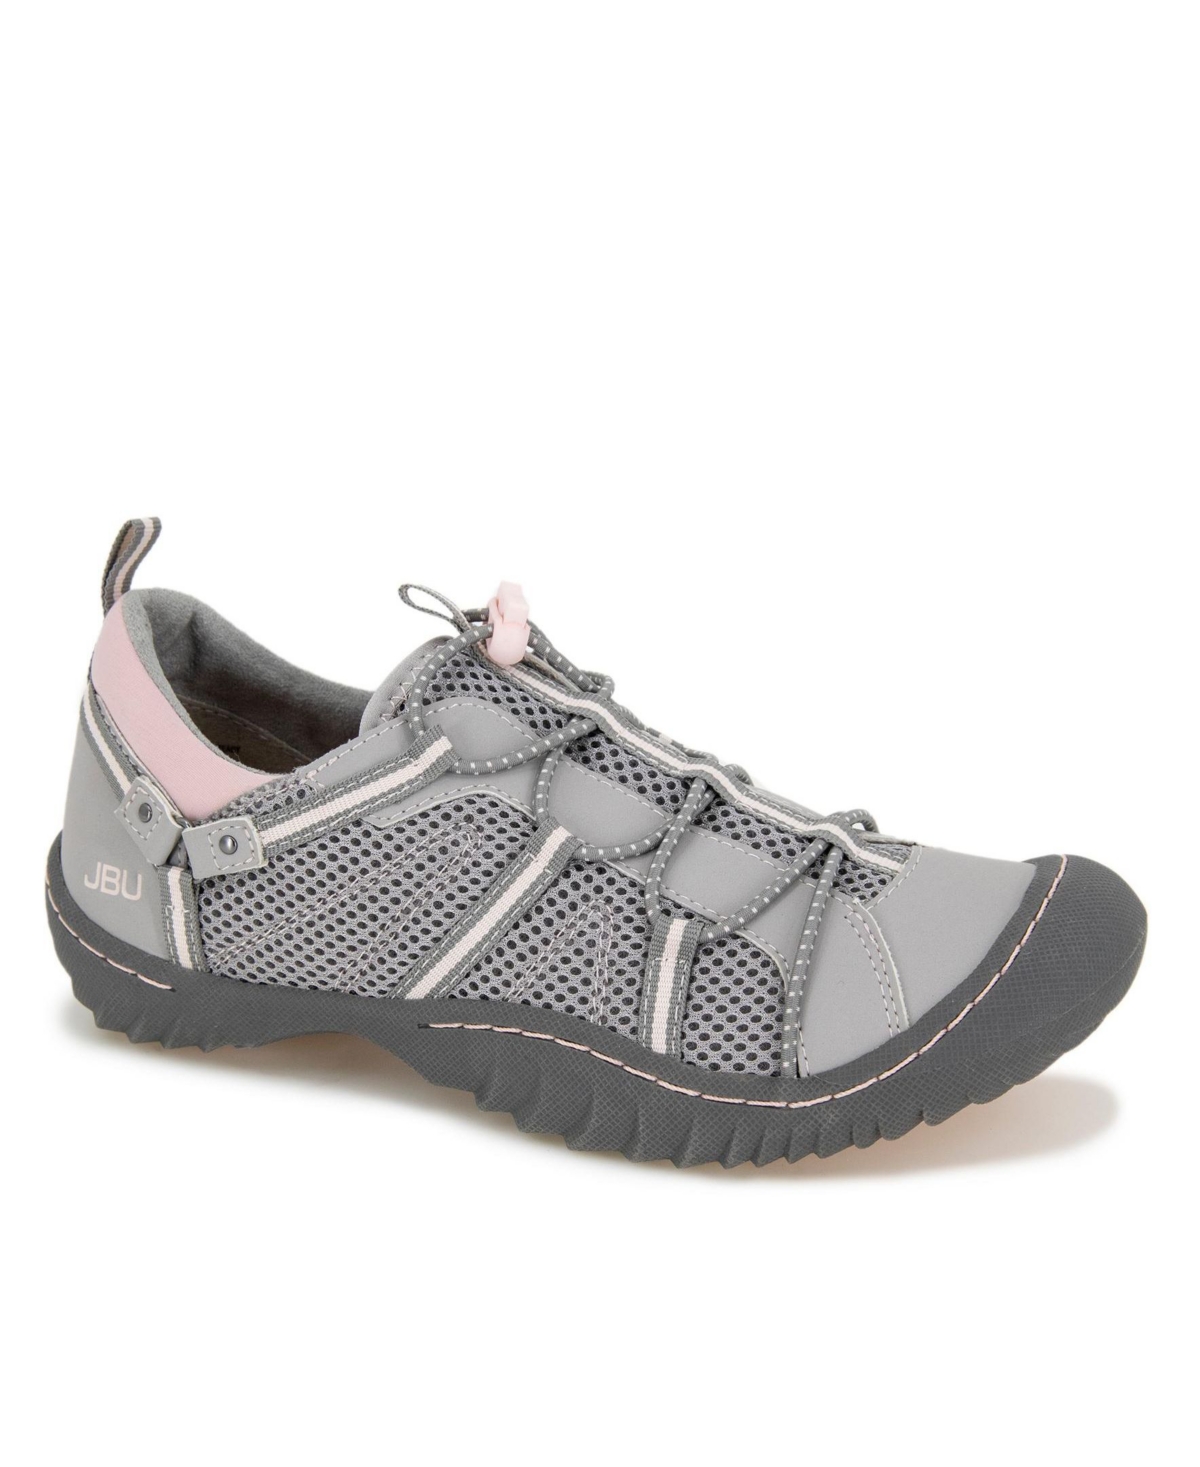 Women's Synergy Bungee Lace-Up Sporty Sneakers - Dark Grey